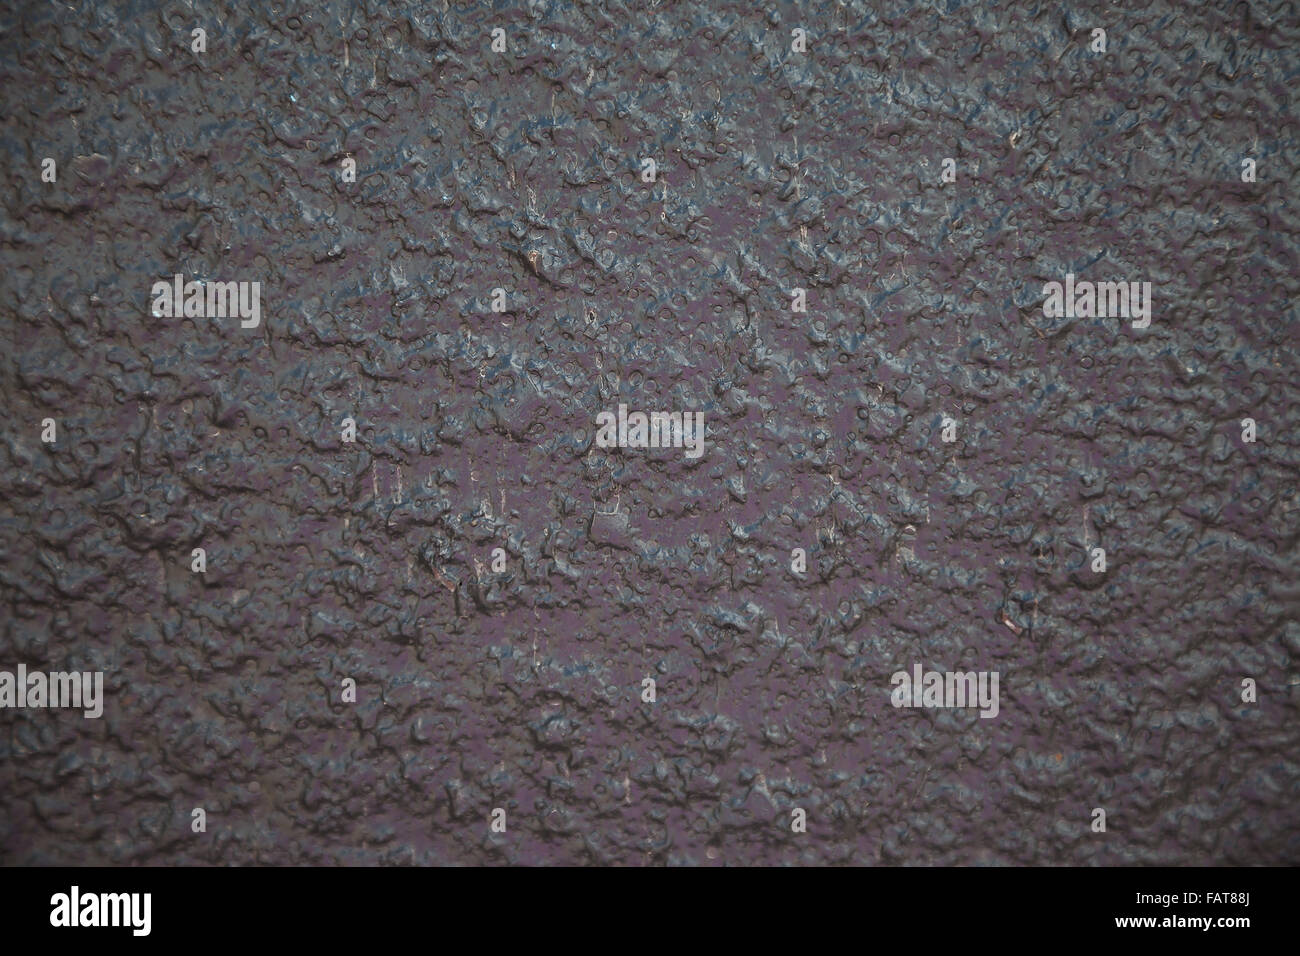 Textured grunge grain surface industrial texture background multicolor Stock Photo